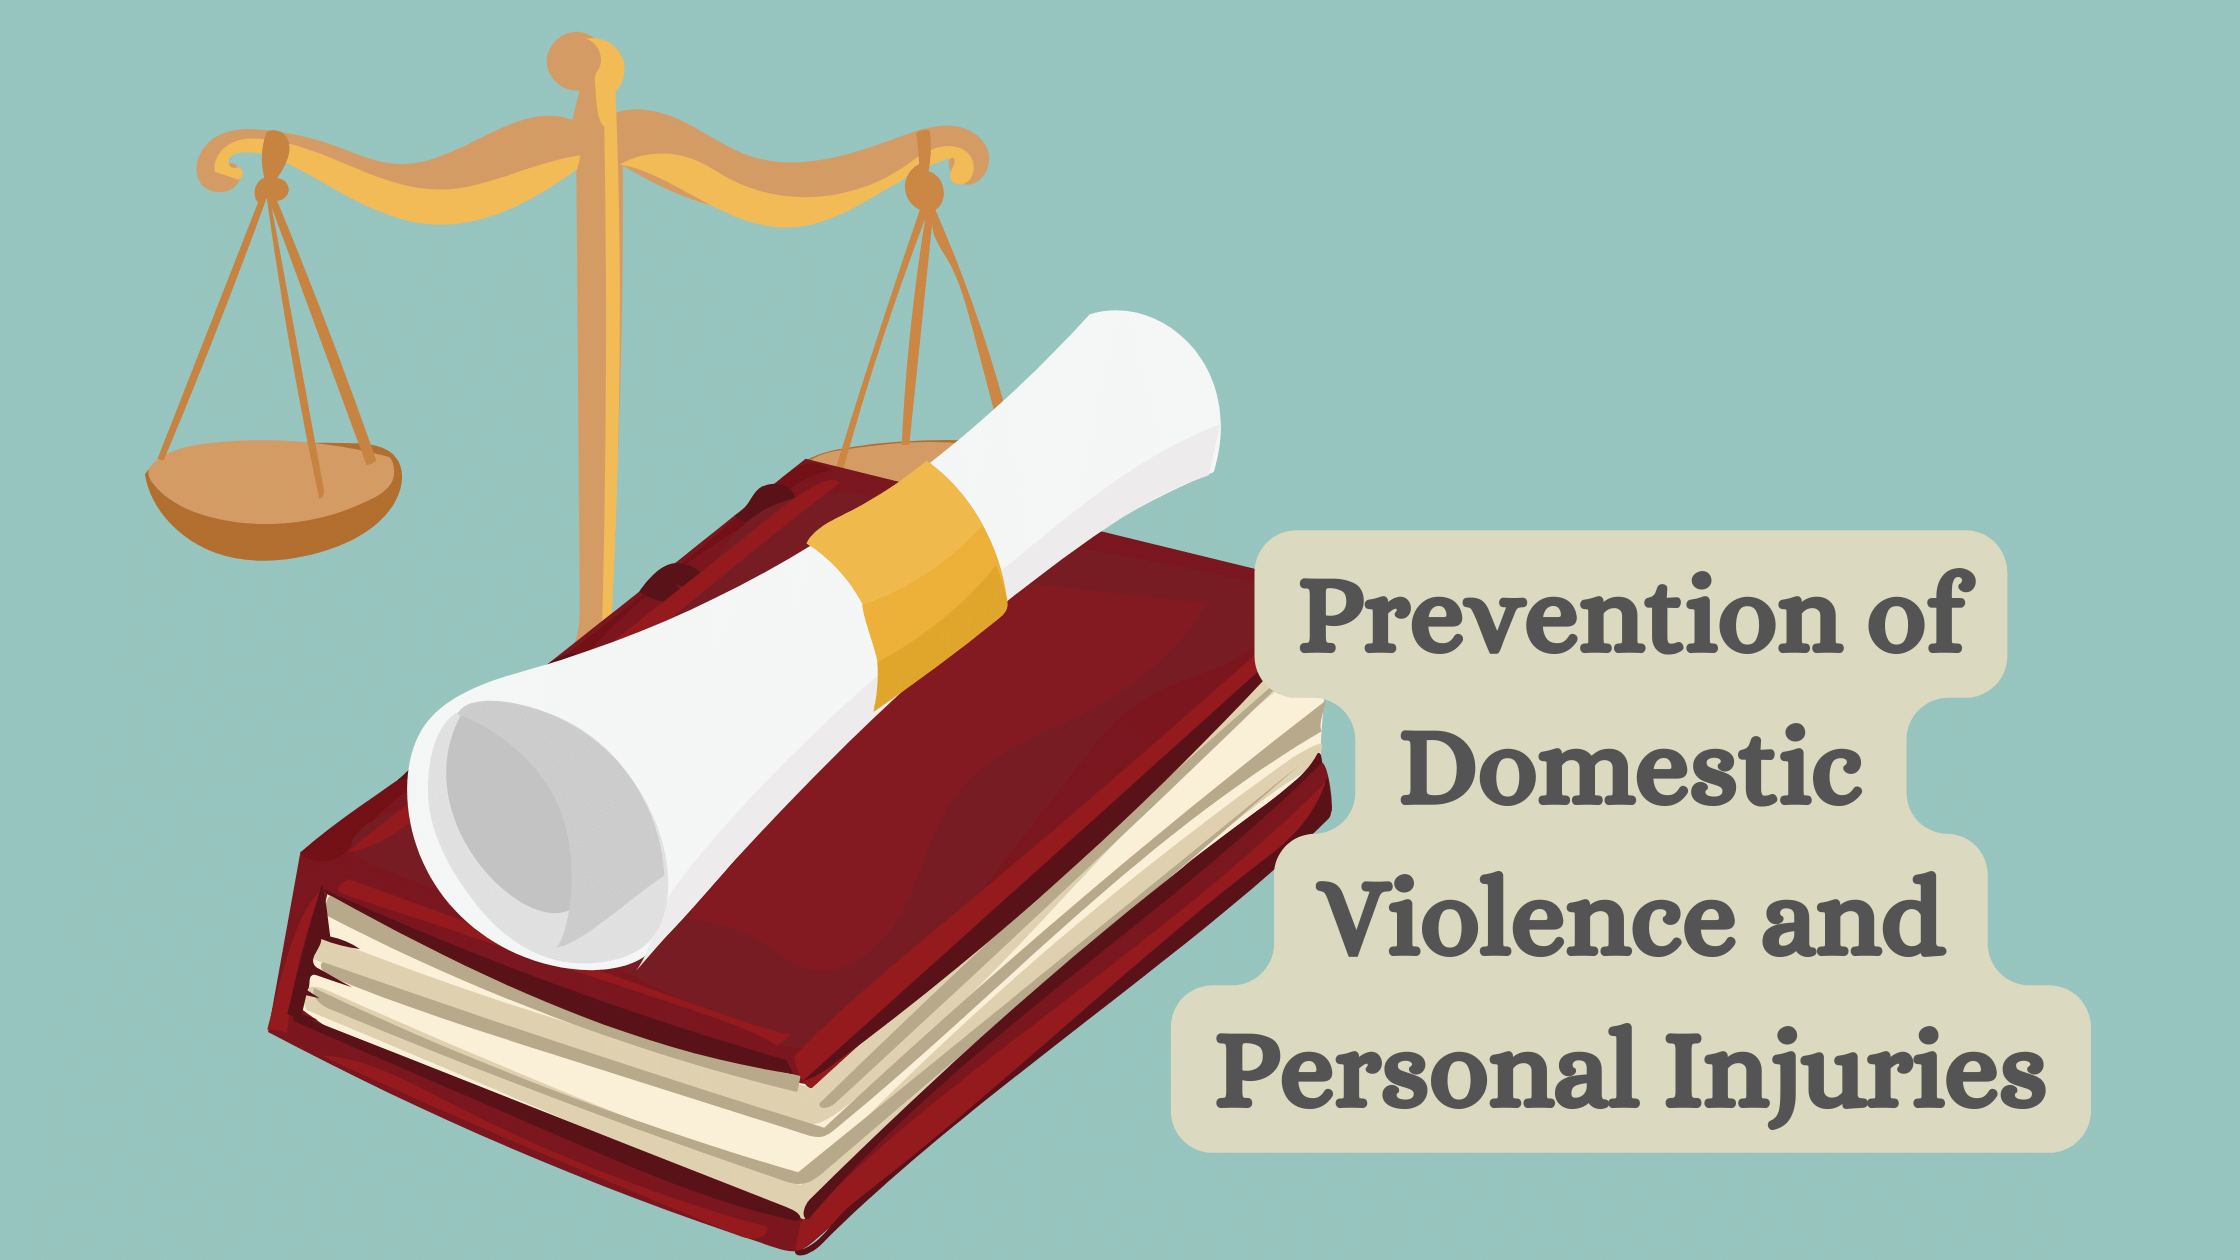 Prevention of Domestic Violence and Personal Injuries